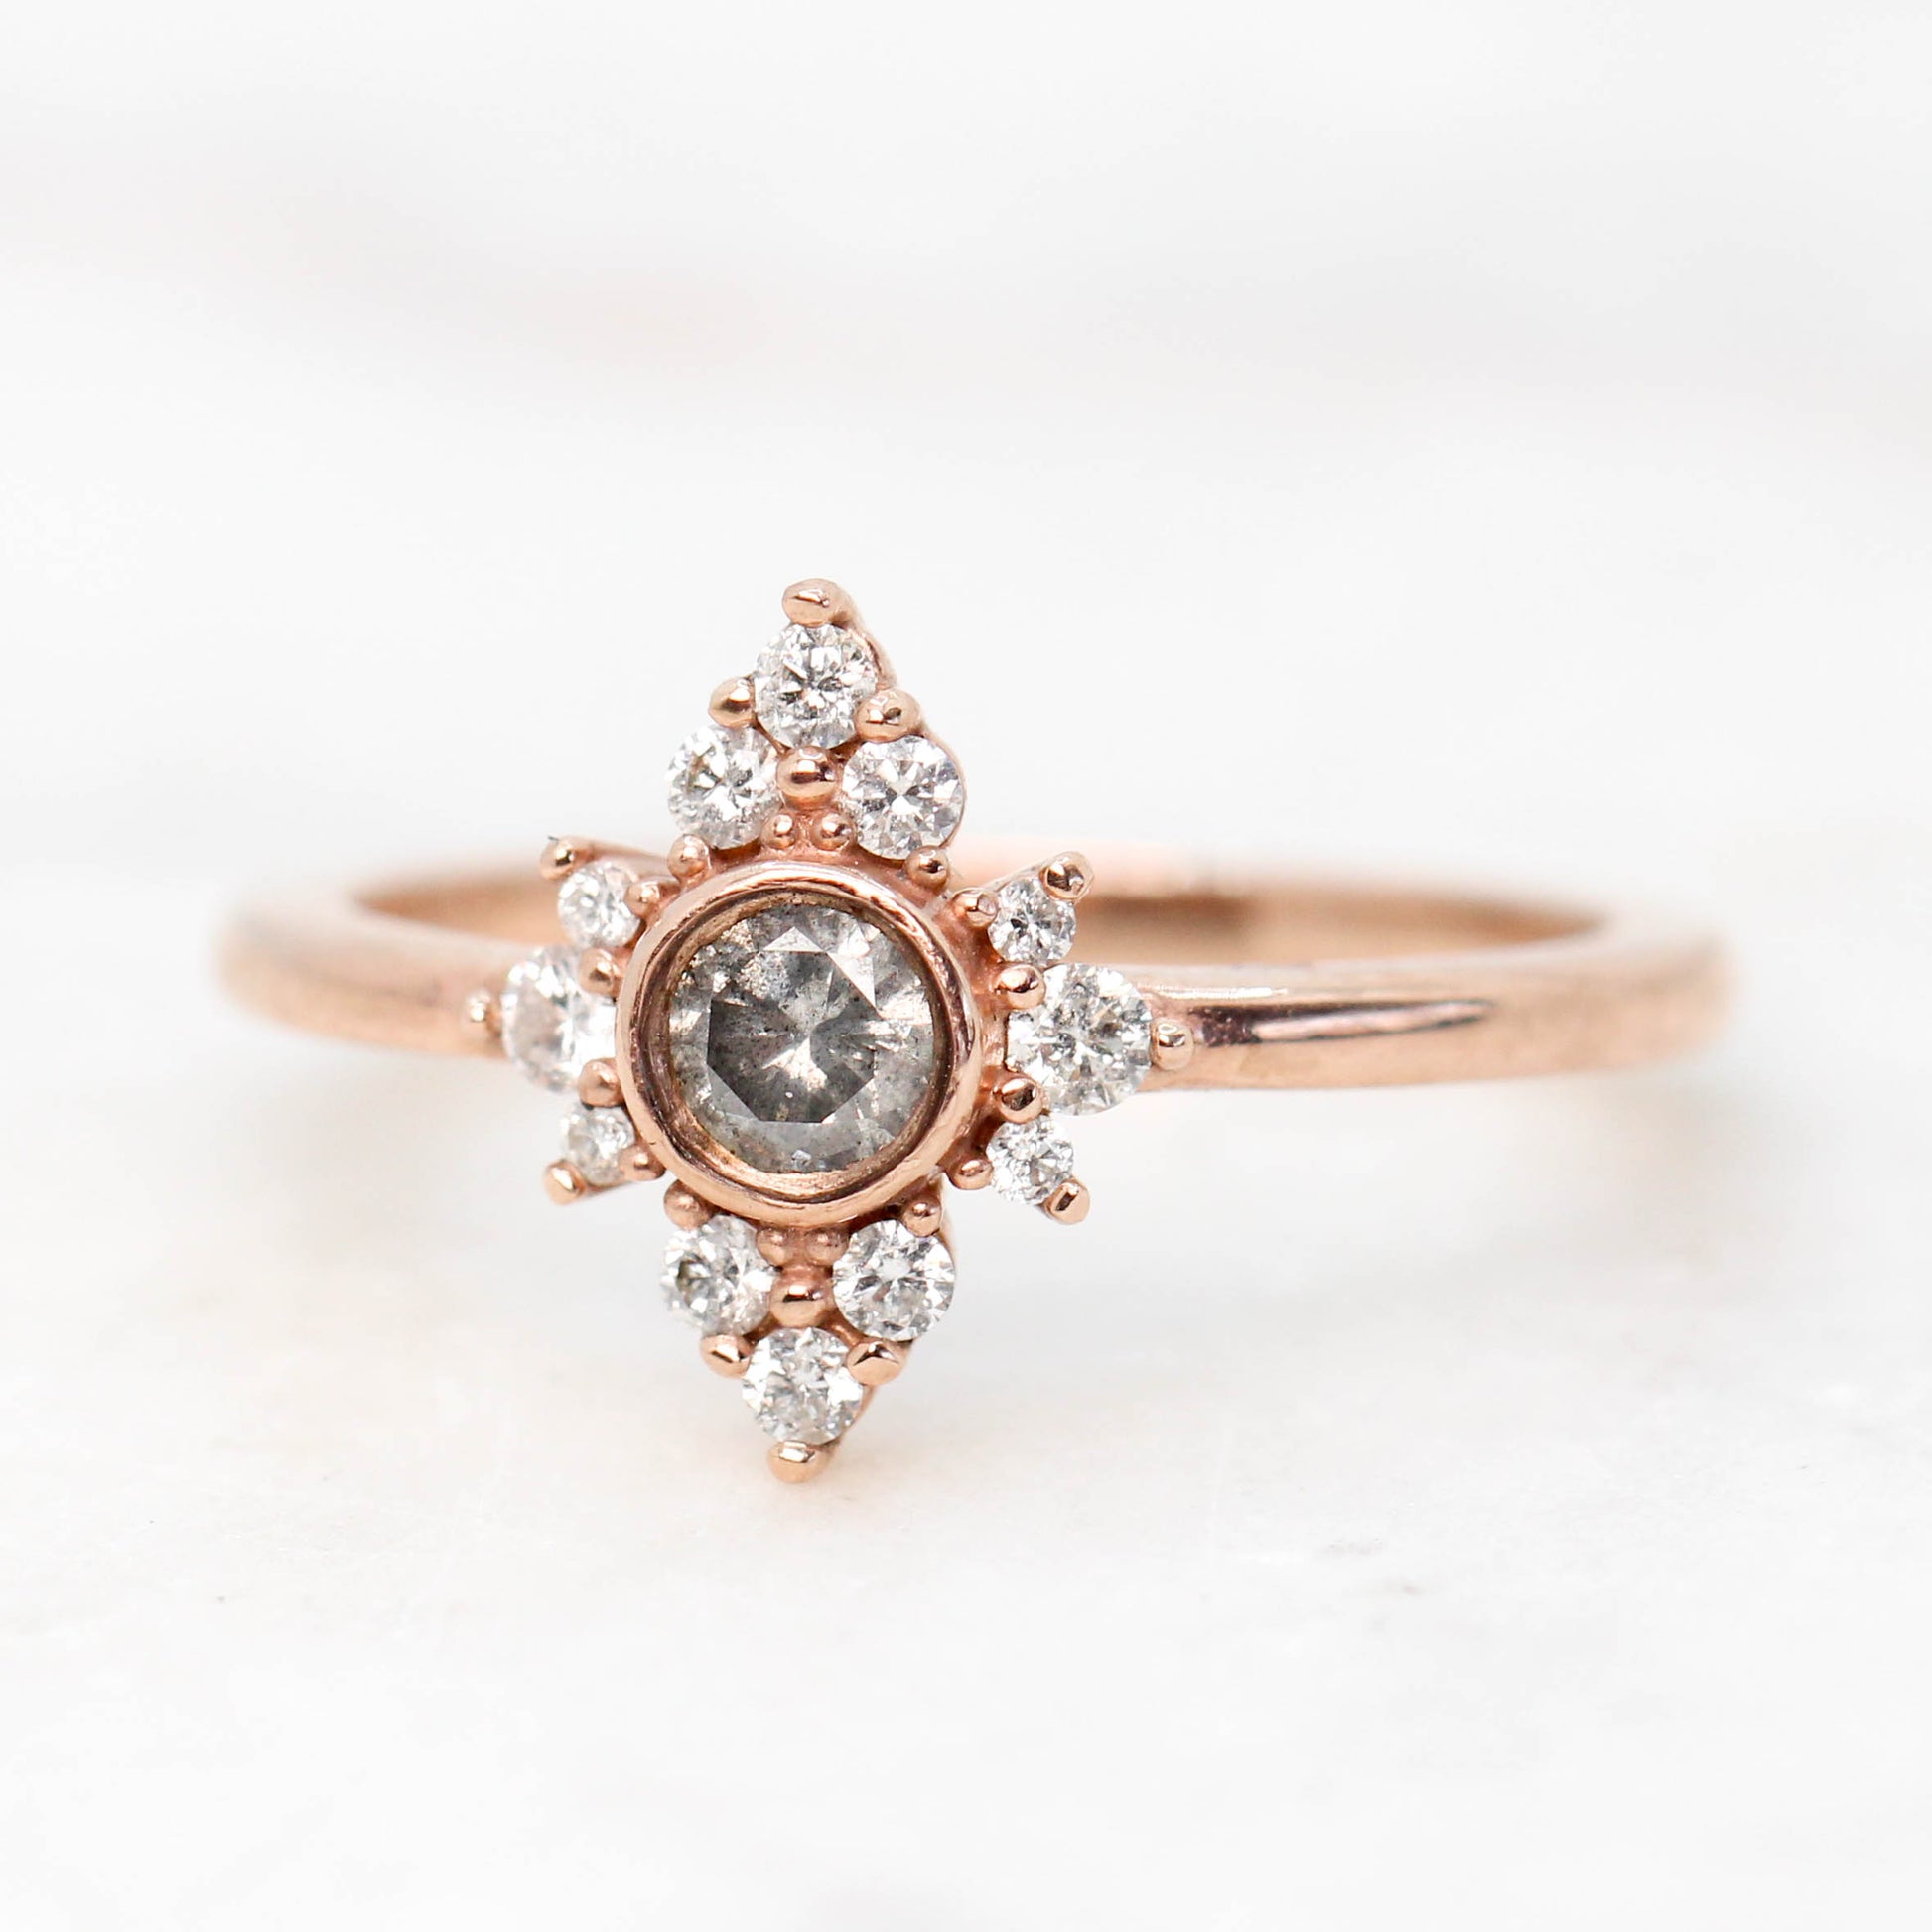 Estrella Ring with Gray Celestial Diamond and Clear Diamond Accents - Ready to size and ship - Midwinter Co. Alternative Bridal Rings and Modern Fine Jewelry